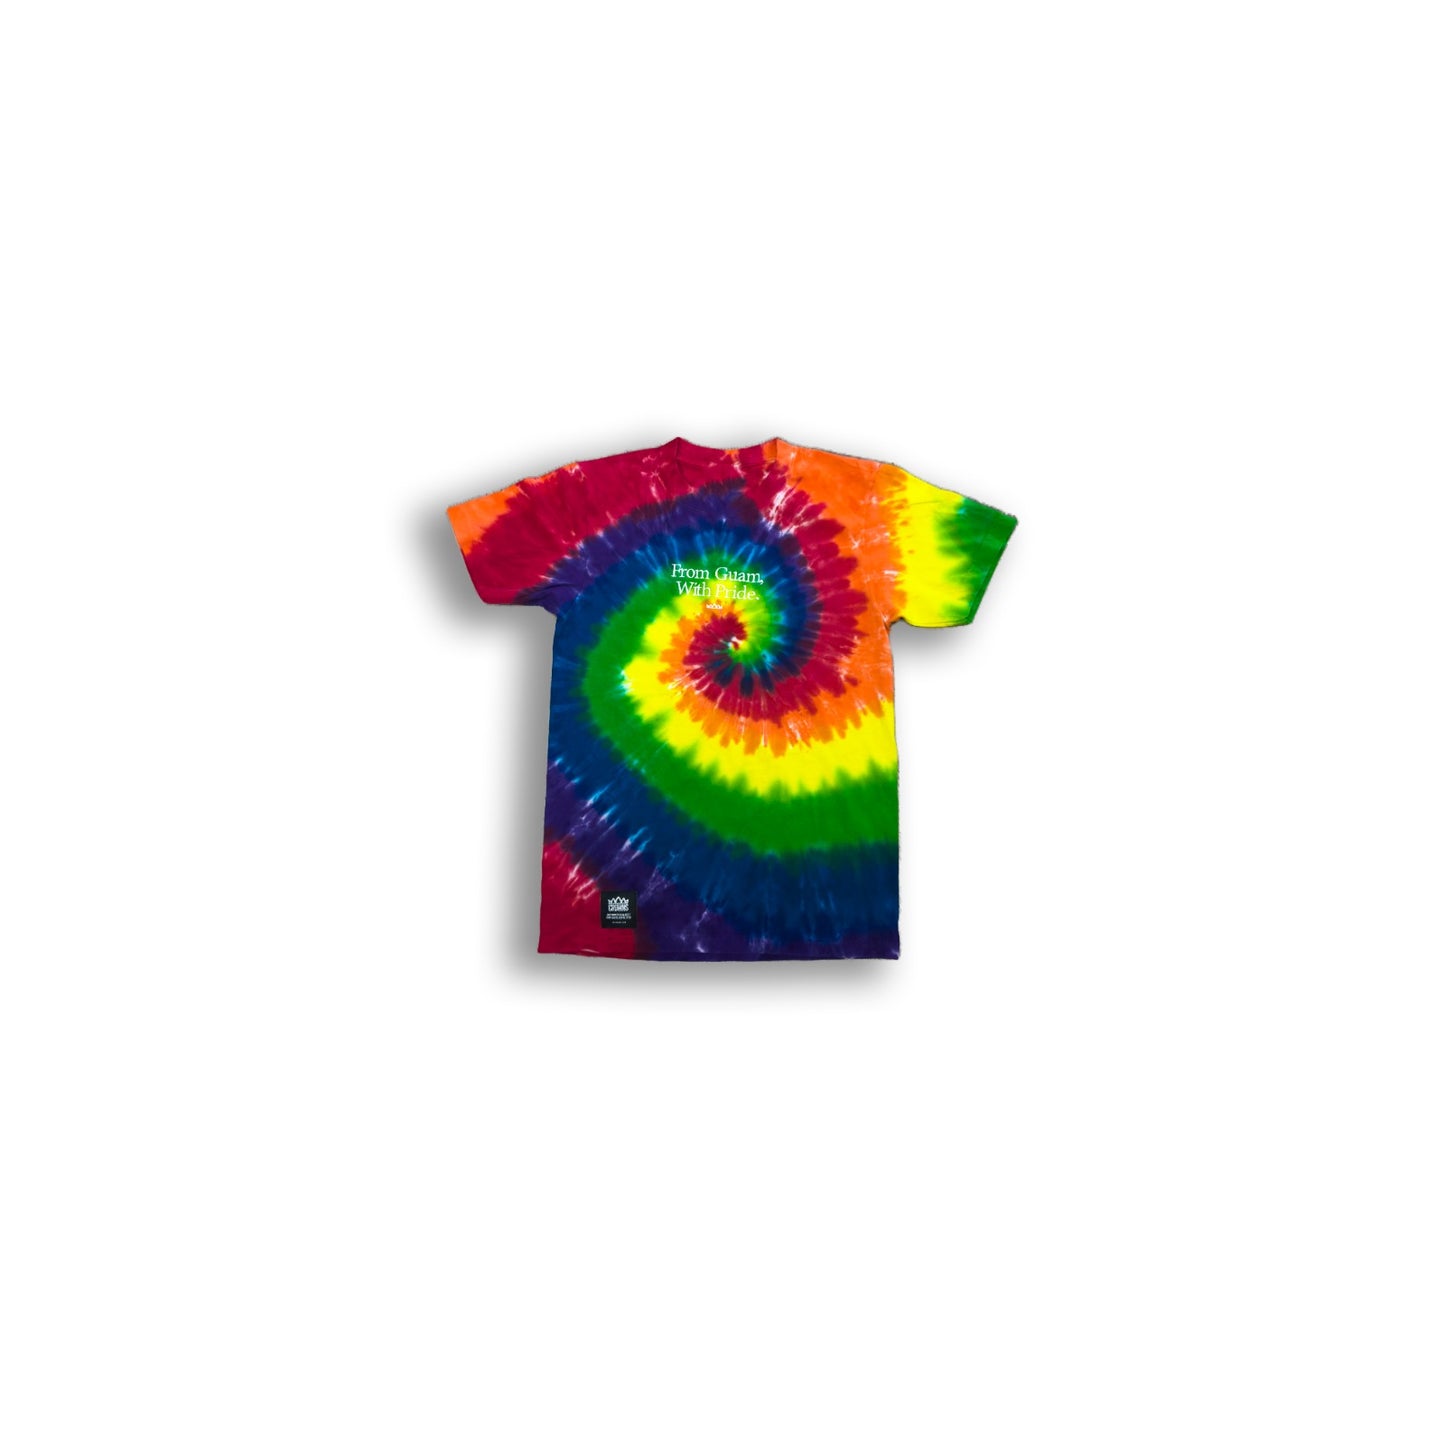 FROM GUAM WITH PRIDE TIE DYE TEE